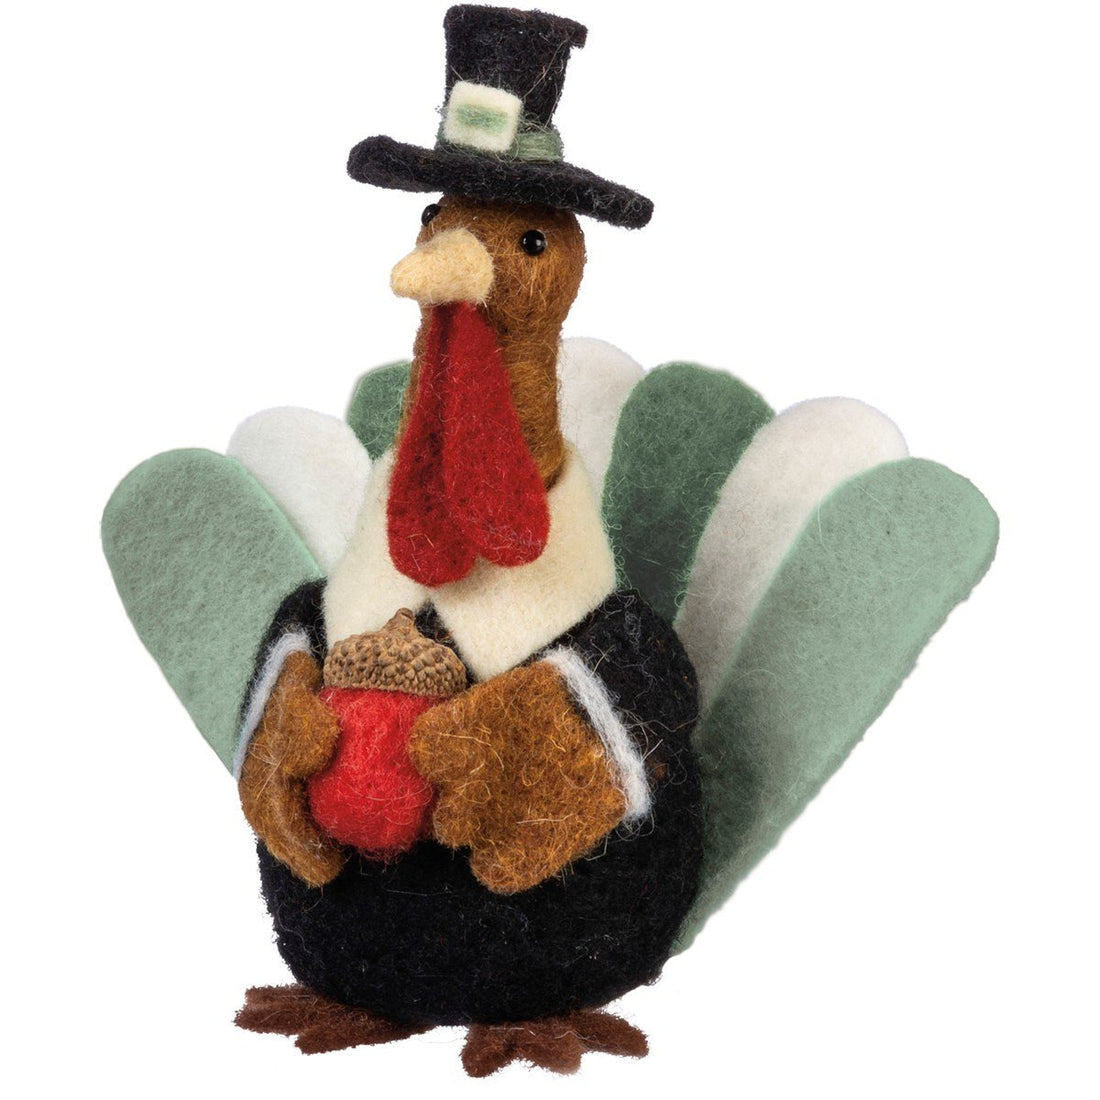 Primitive Farmhouse Rustic Felted Turkey 8” Fall Thanksgiving - The Primitive Pineapple Collection